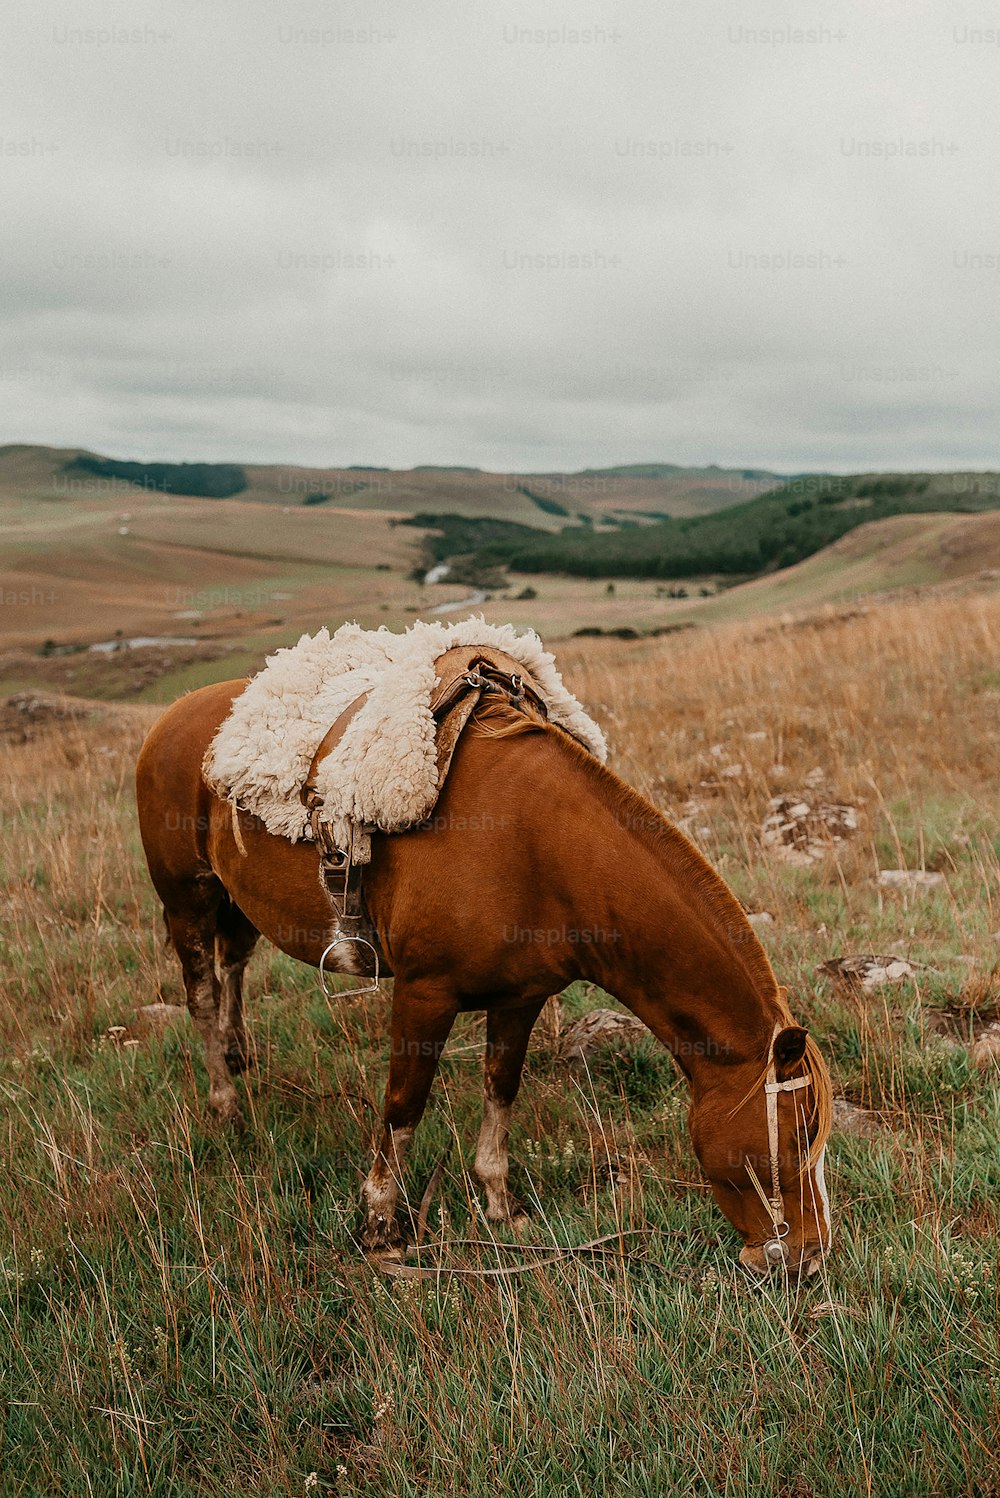 a brown horse grazing on grass in a field